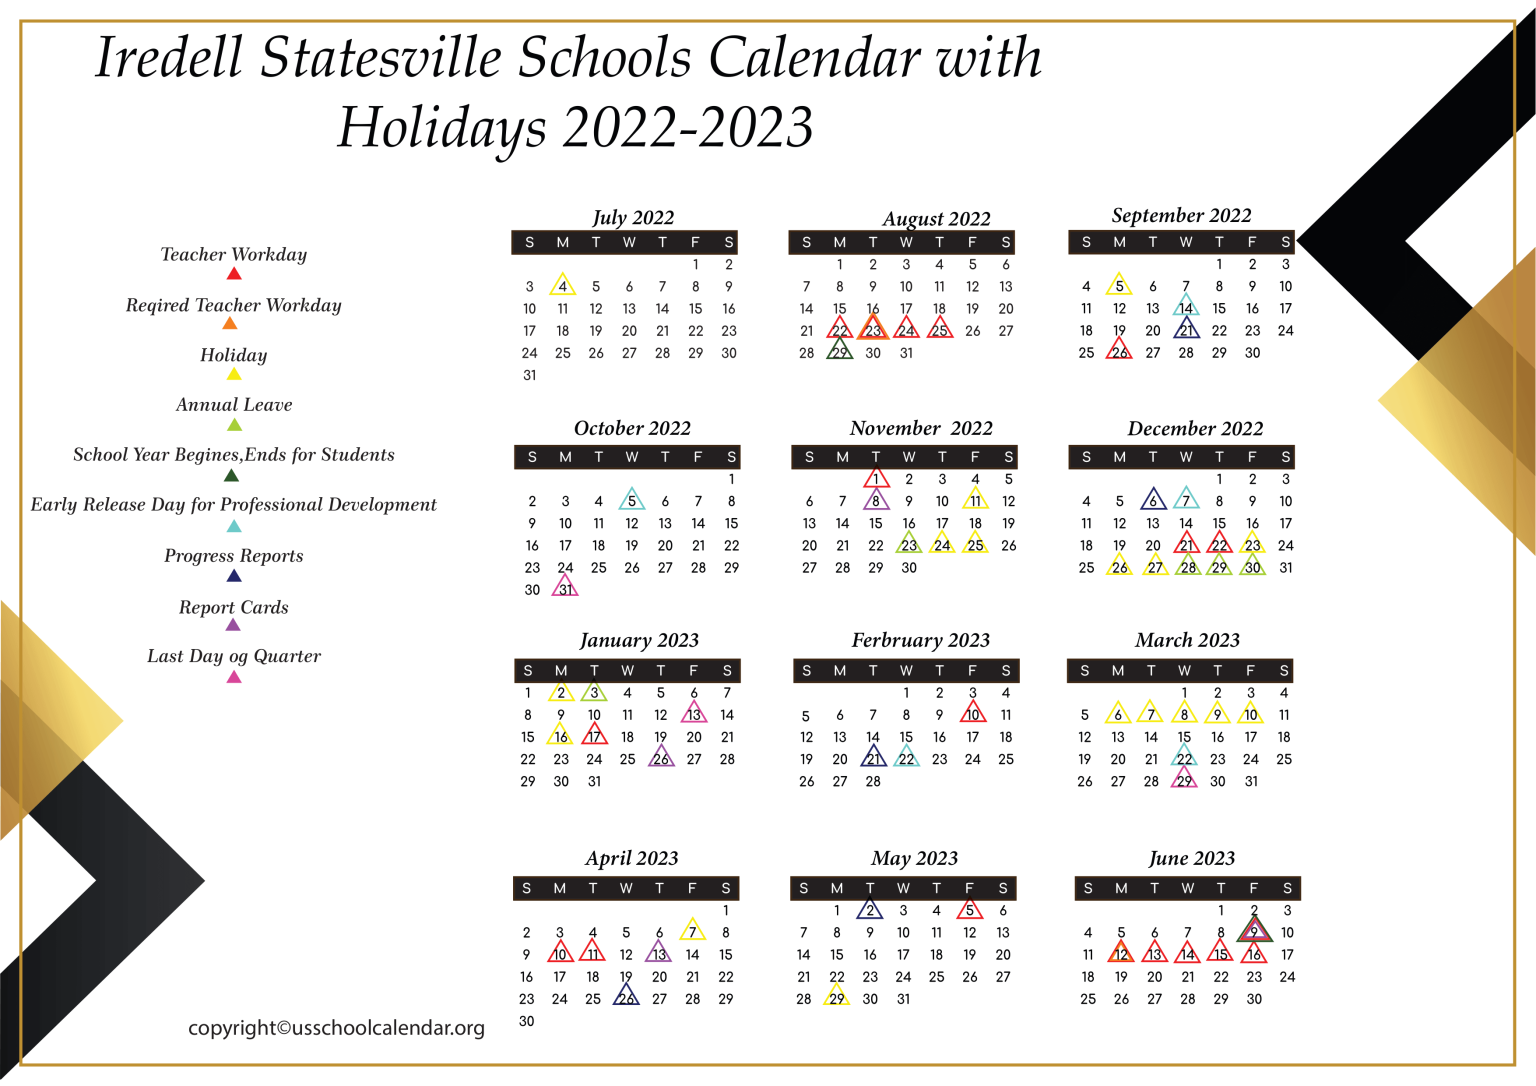 Iredell Statesville Schools Calendar with Holidays 2022 2023